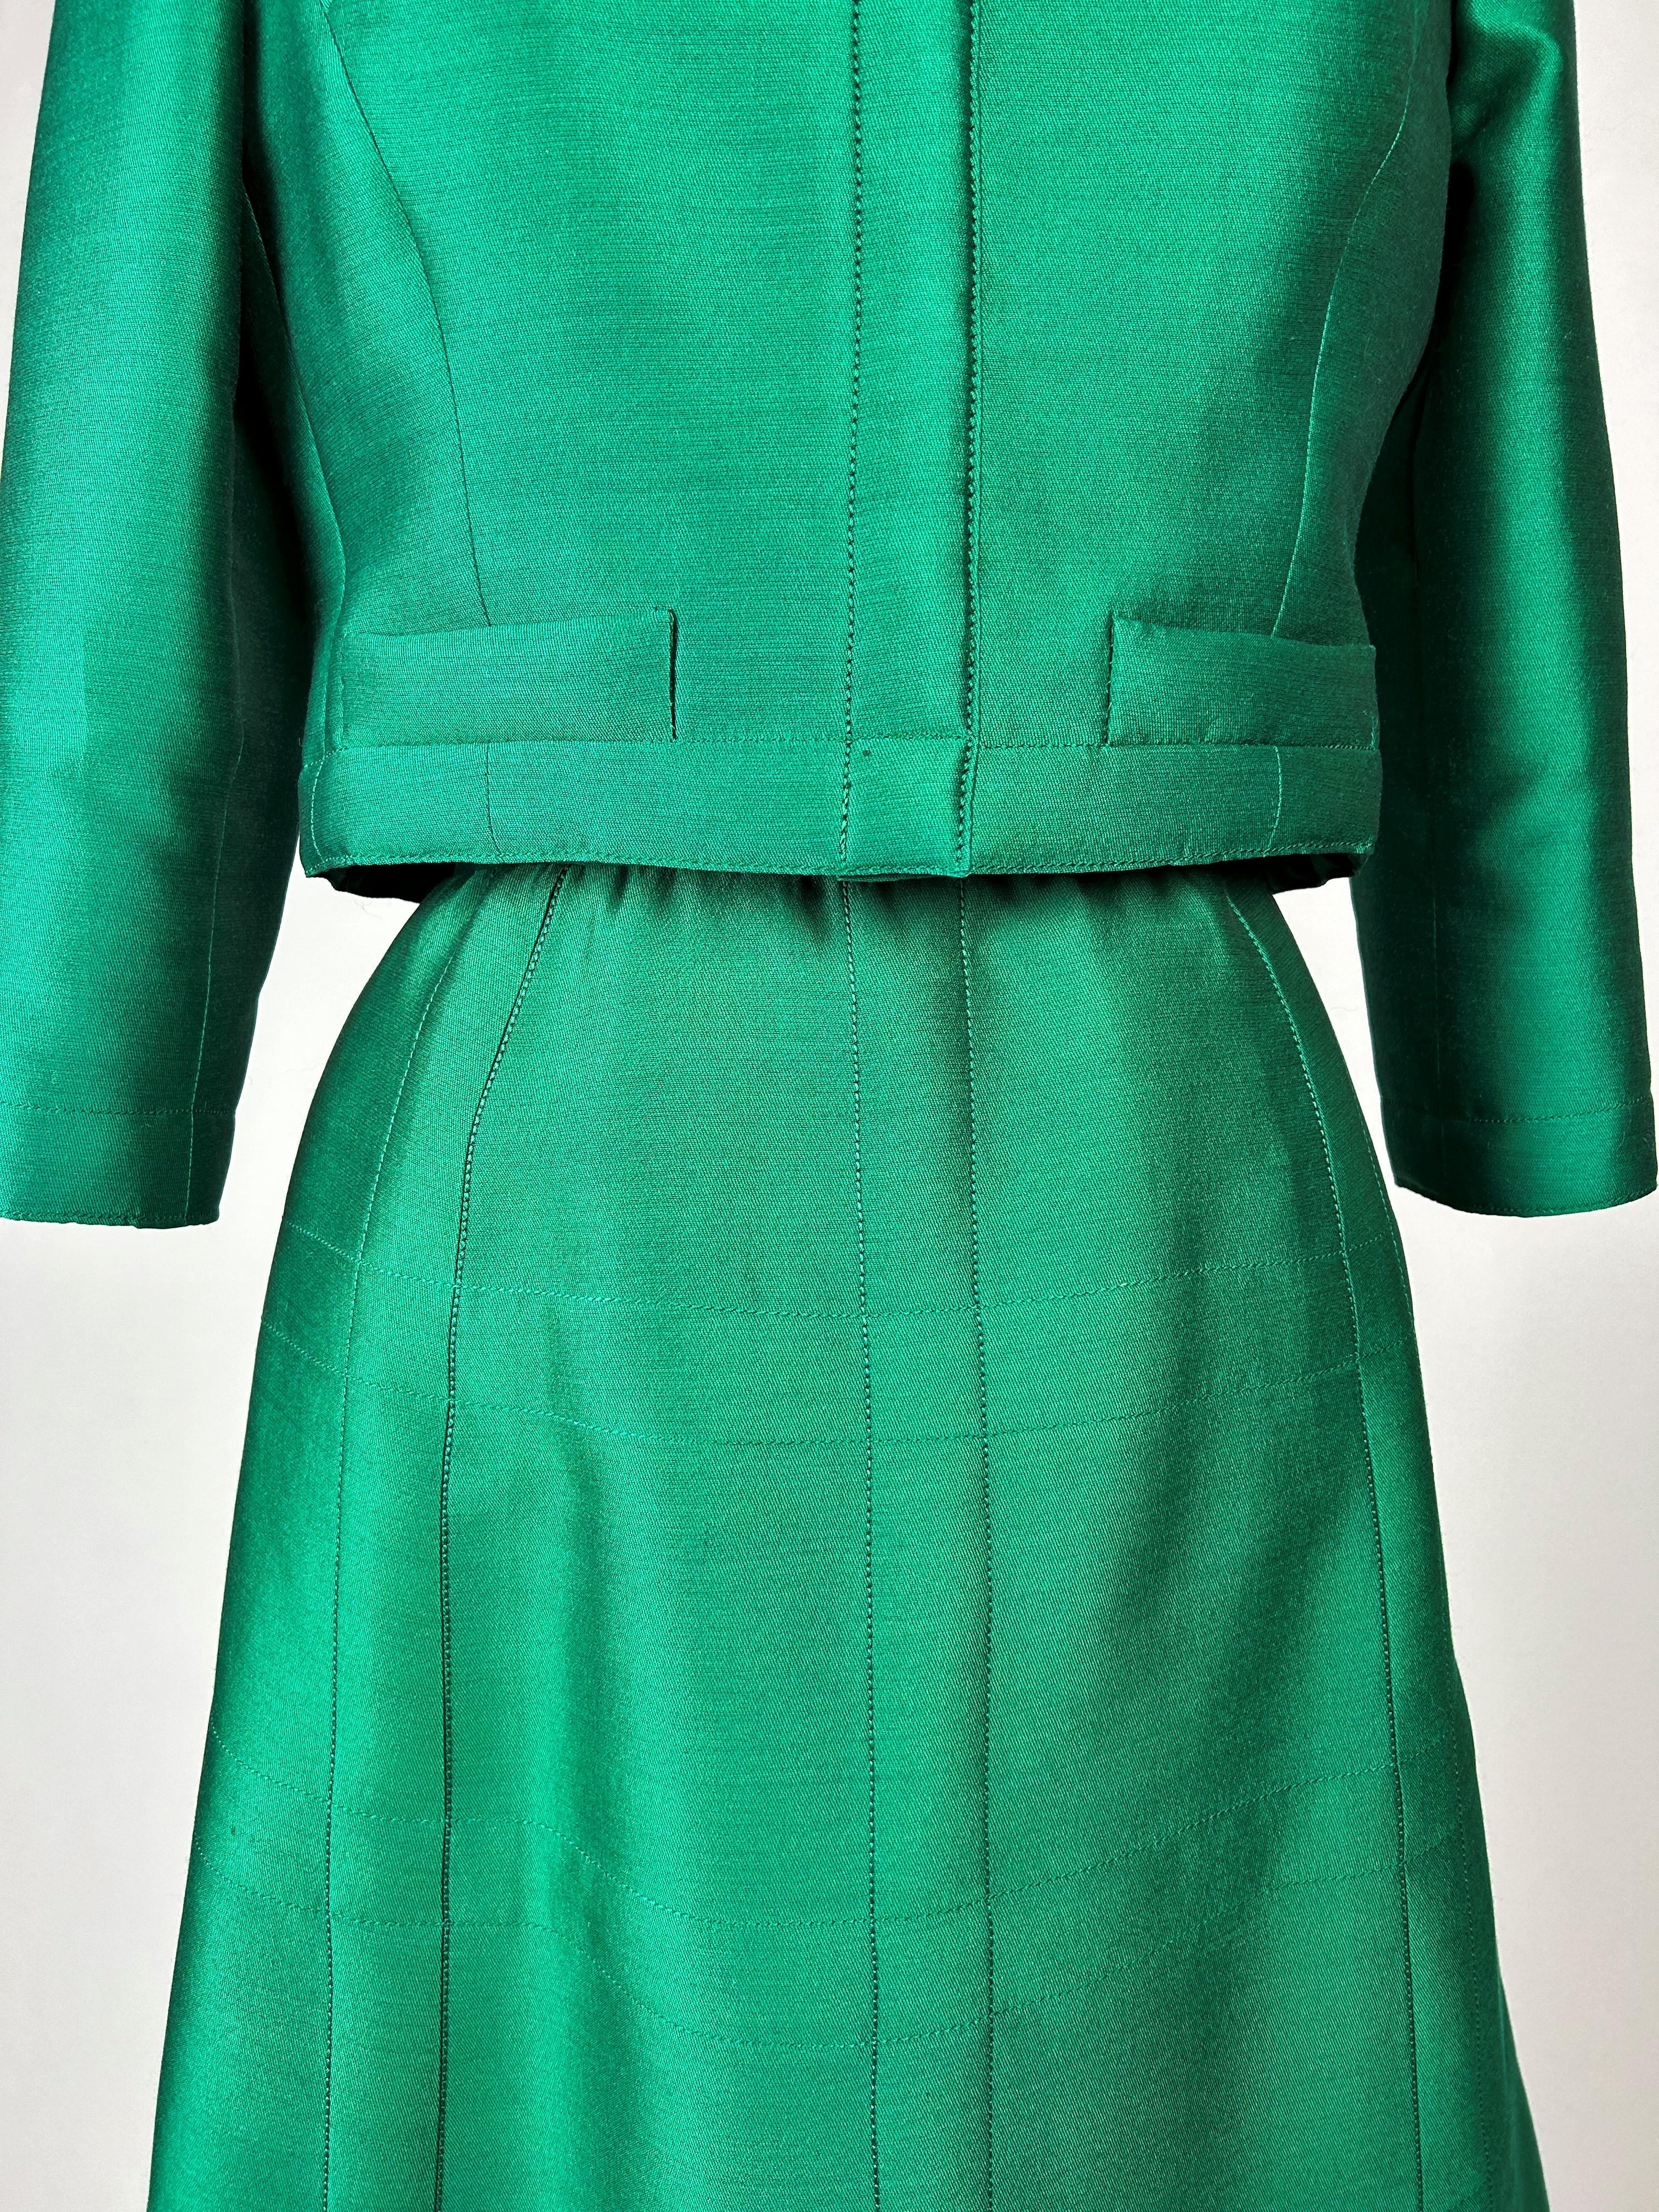 An Emerald Gazar Demi-Couture Skirt Suit by Louis Féraud Circa 1968-1972 For Sale 8